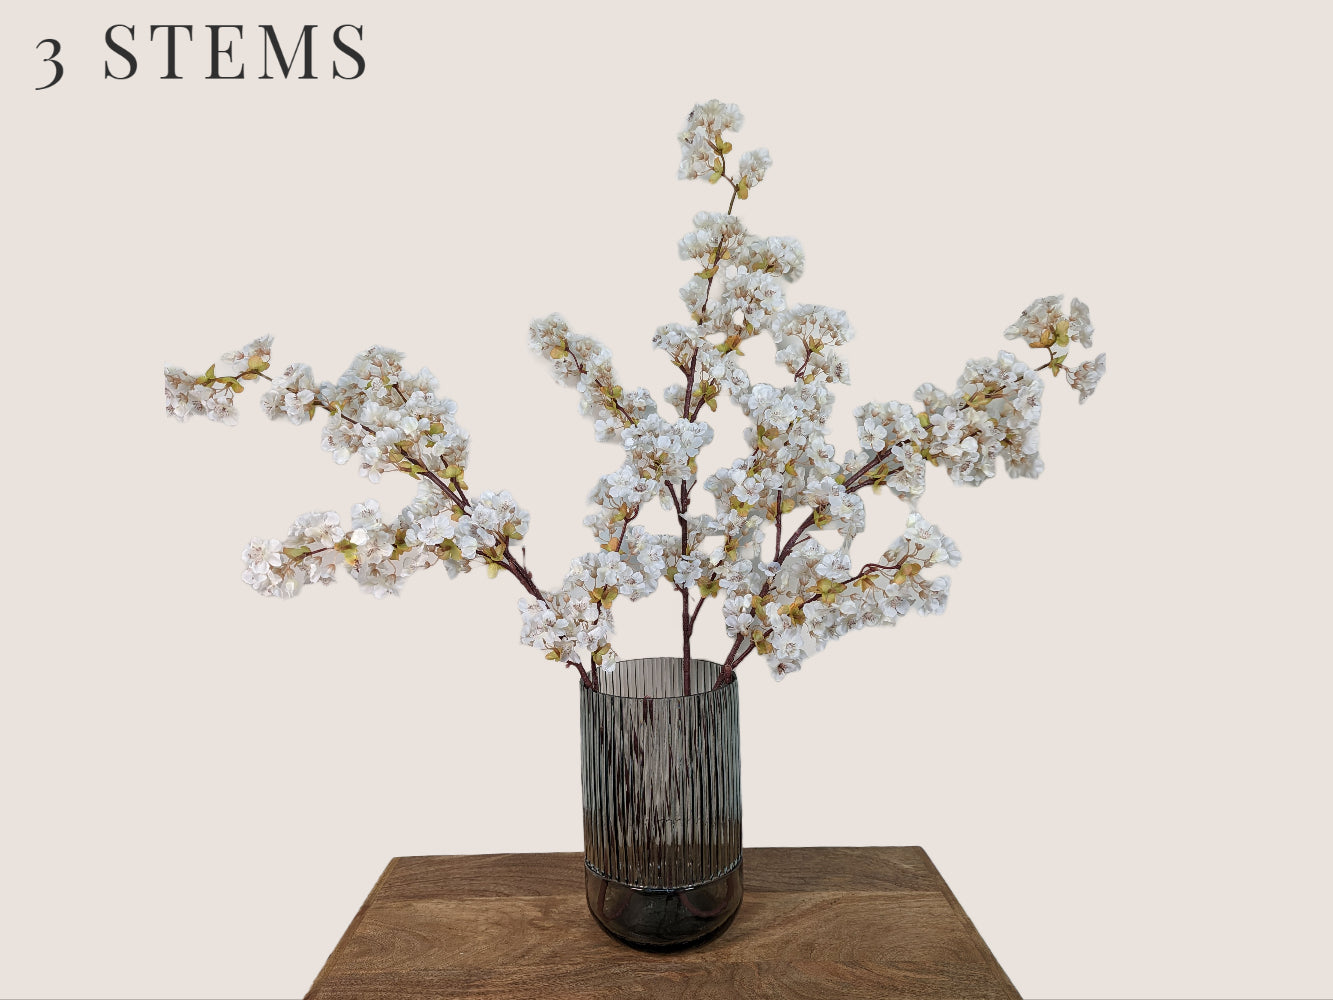 Three lifelike cream-colored cherry blossom stems arranged in a fluted smokey gray vase, standing against a beige background. Each 40-inch stem features three branches with light green buds and brown lifelike stems. Mauve and pink stamens add to the realistic appearance of the artificial flowers.